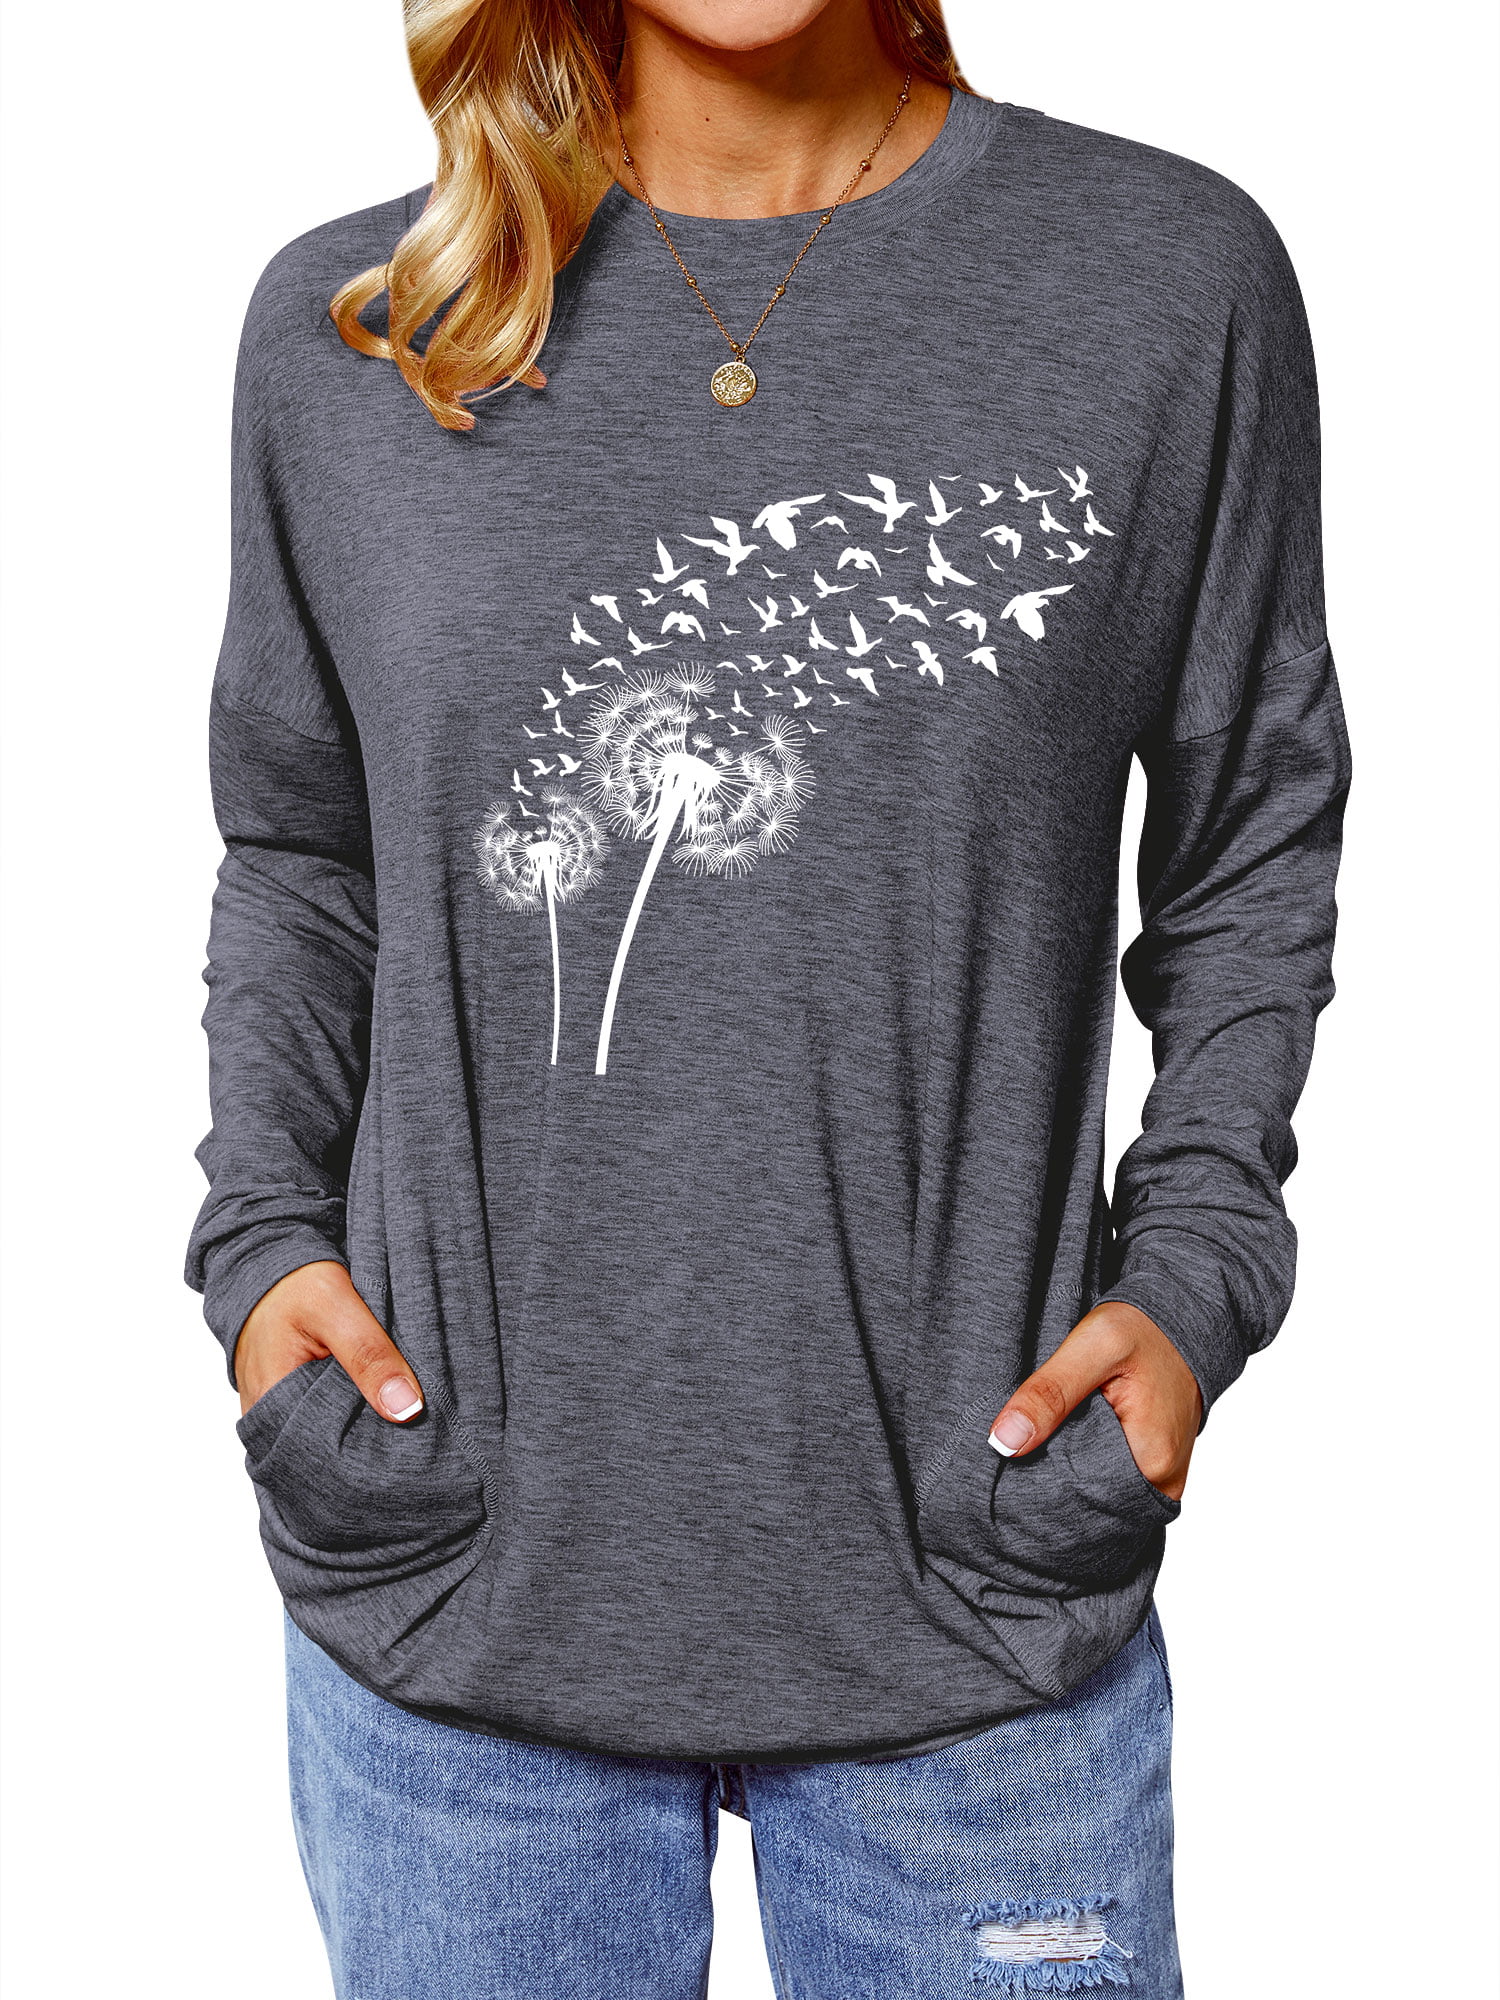 POTO Pullover Sweatshirts for Women Cround Neck Long Sleeve Blouses Dandelion Printing Tee Shirts Tops